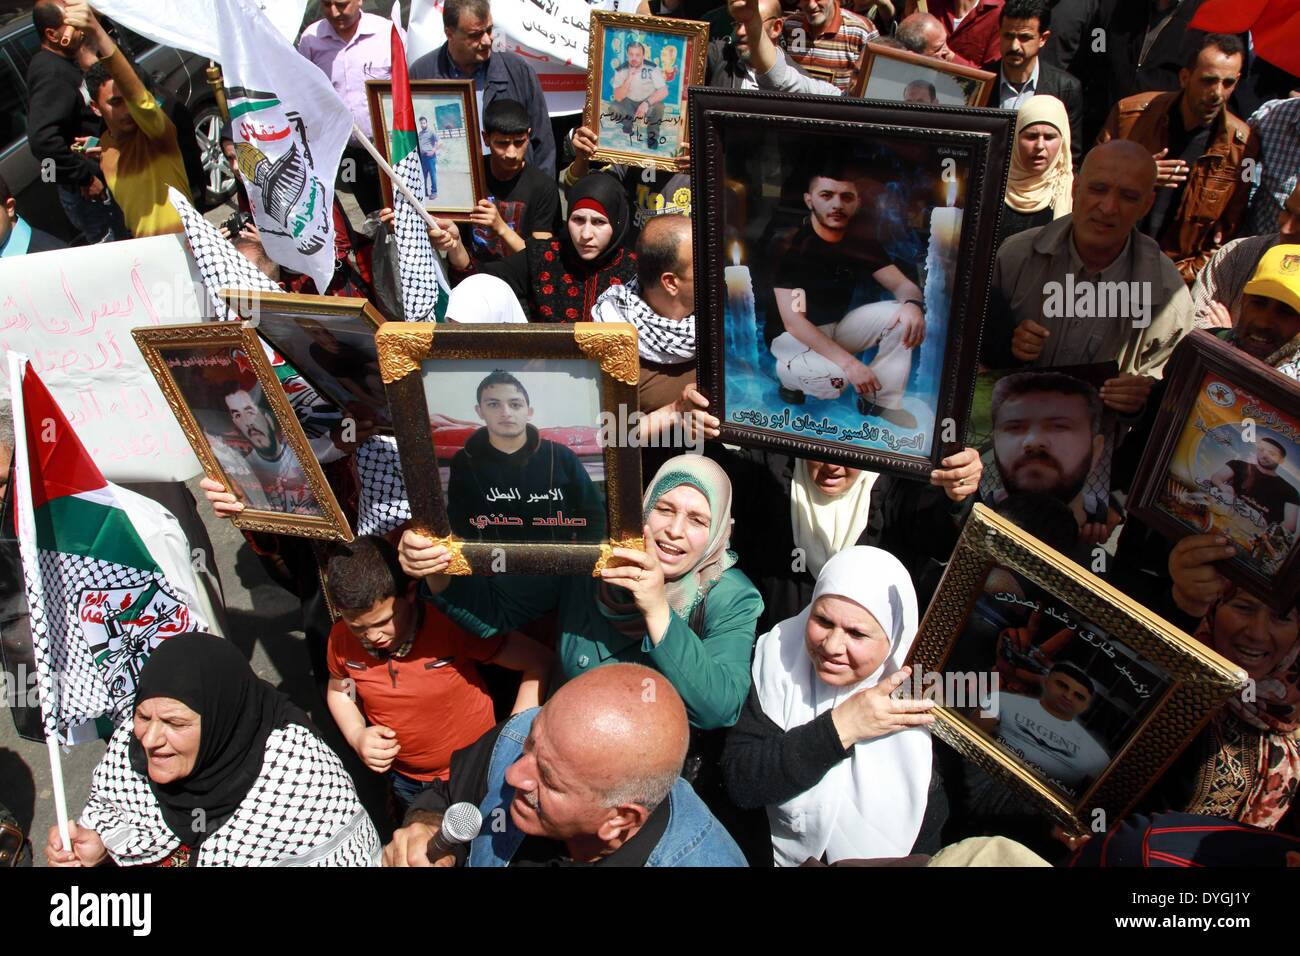 Nablus, West Bank town of Tulkarem. 17th Apr, 2014. Palestinians hold pictures of their relatives in Israeli jails as they take part in the commemoration marking Palestinian Prisoner Day, which is a solidarity day with Palestinians in Israeli jails, in the West Bank town of Tulkarem, on April 17, 2014. Credit:  Ayman Nobani/Xinhua/Alamy Live News Stock Photo